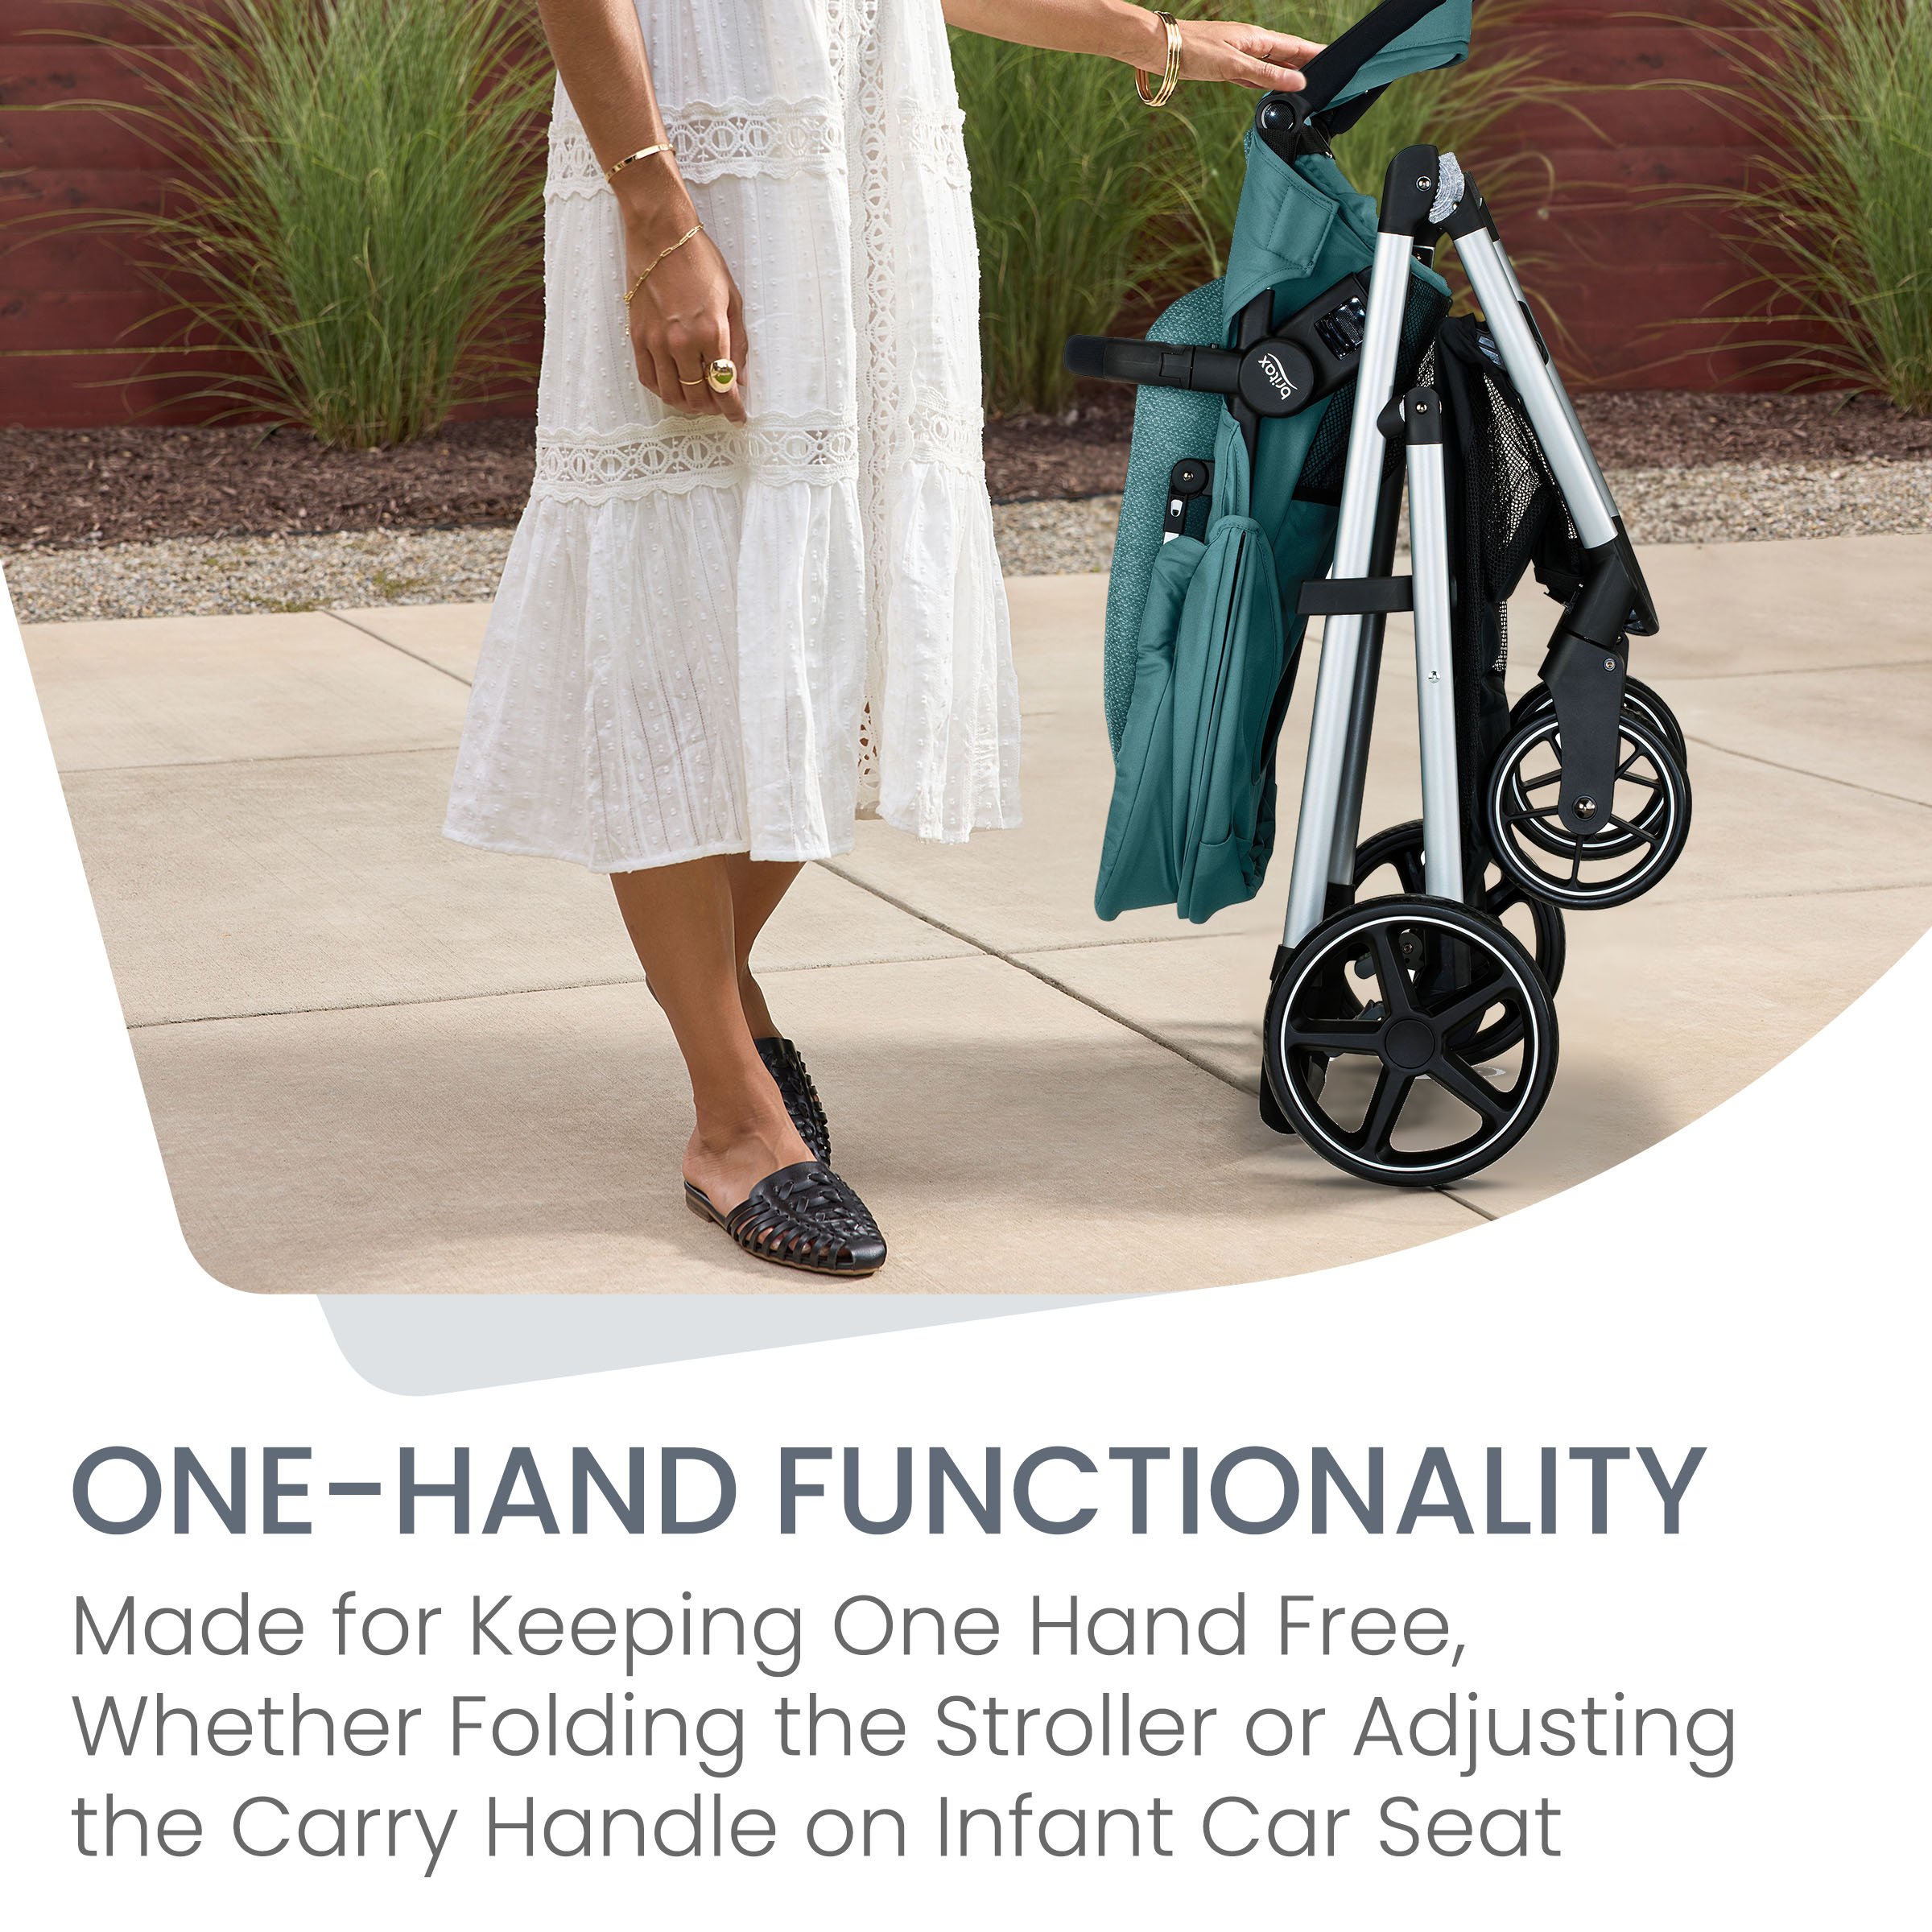 Mom demonstrating One-Hand Functionality with folded Grove stroller